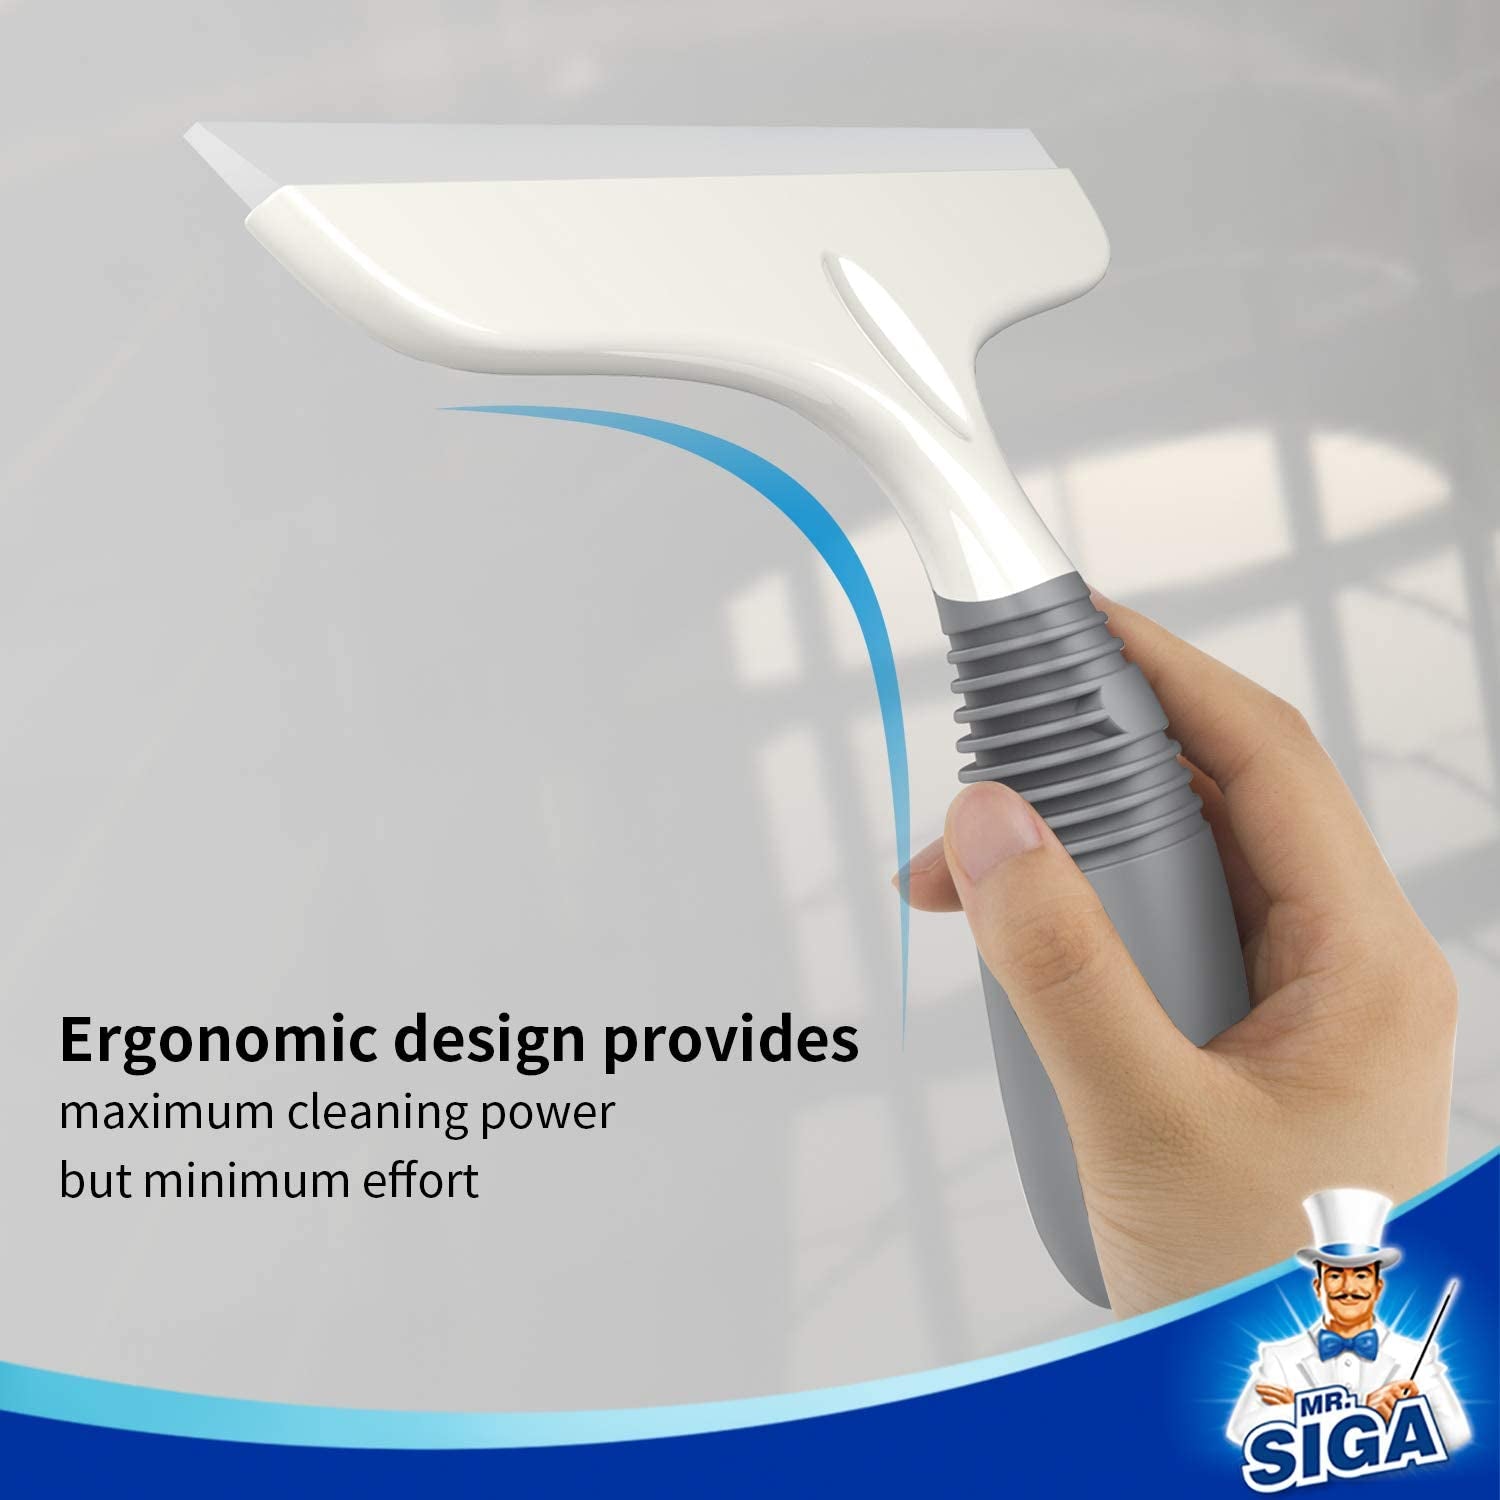 MR.SIGA Multi-Purpose Squeegee for Window, Glass, Shower Door, Car, Heavy Duty Window Scrubber, Suction Hook Included, 10 Inch, White & Gray